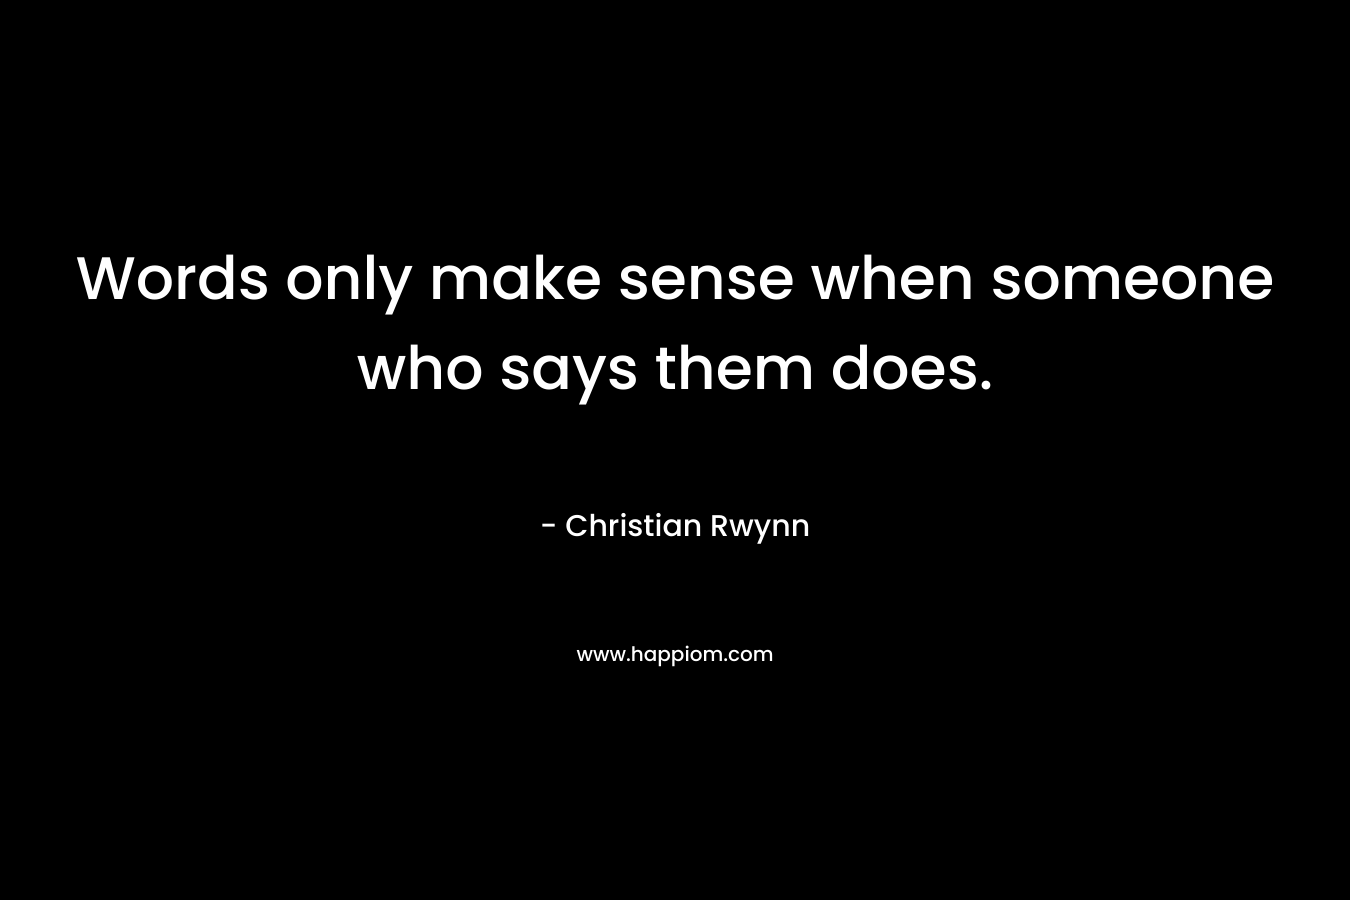 Words only make sense when someone who says them does.